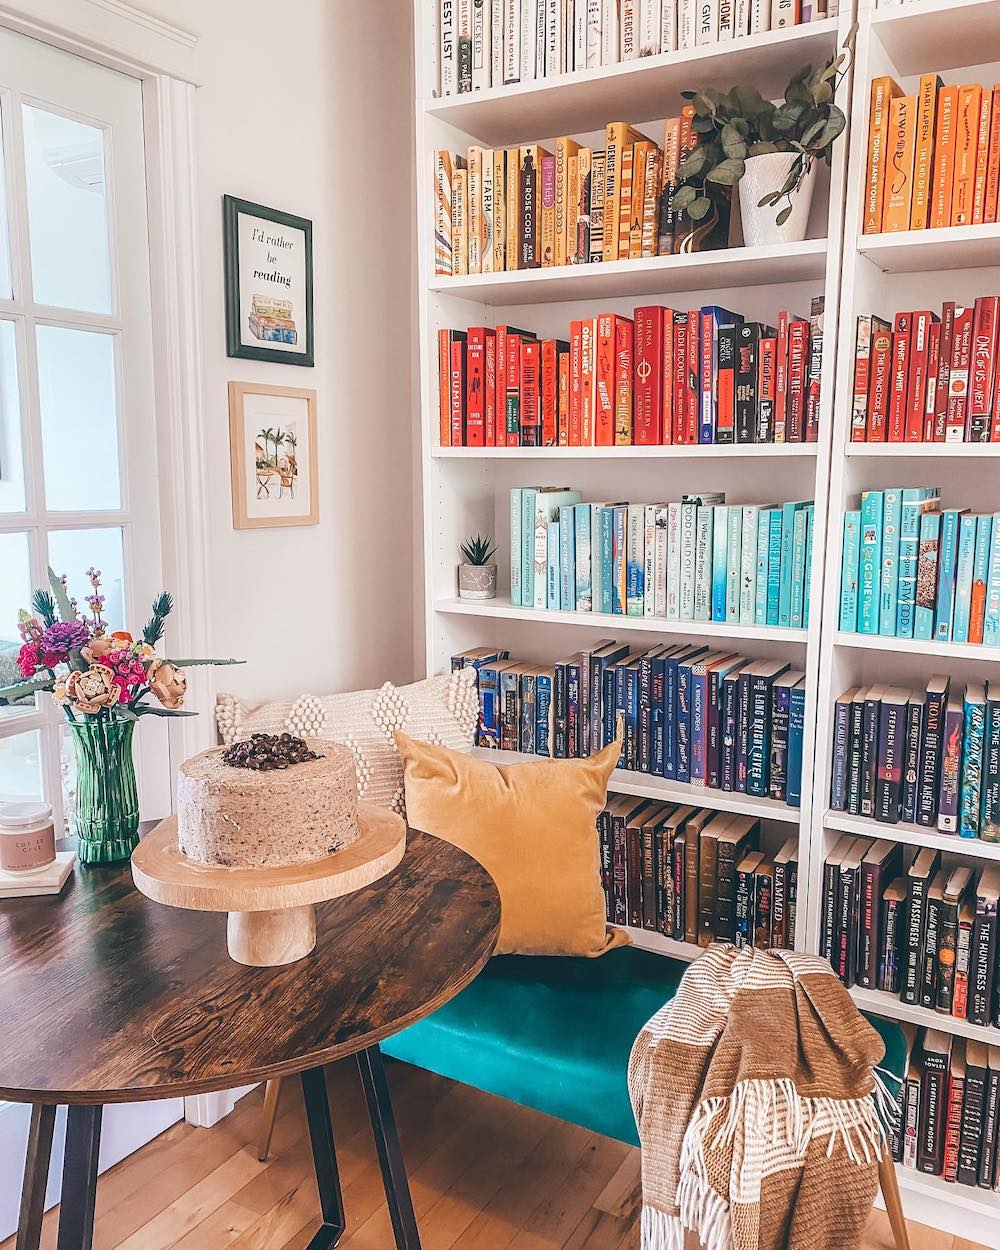 Home Library Ideas S 2 #Library #HomeLibrary #ReadingNooks 